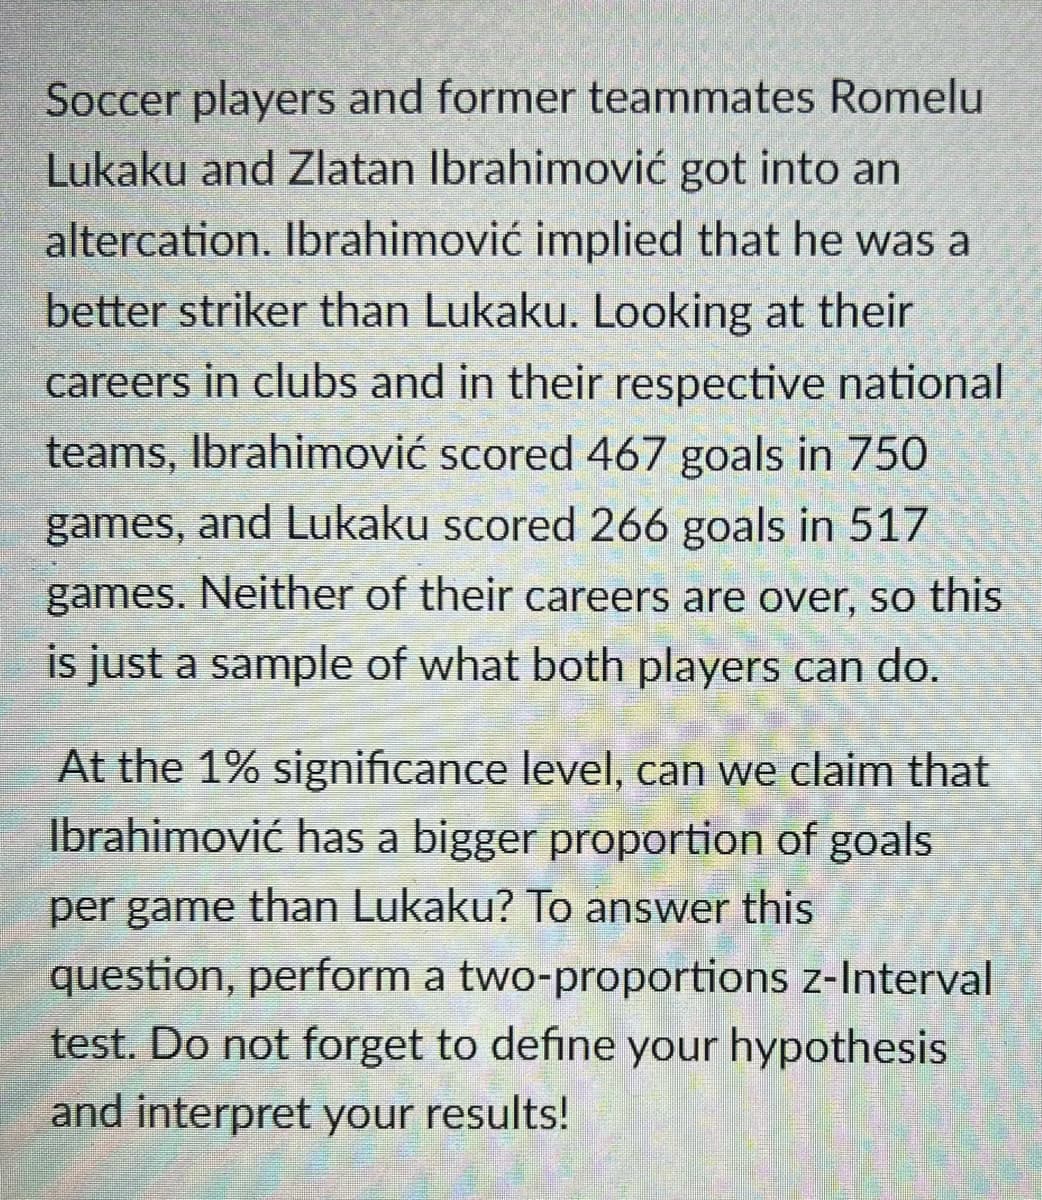 Soccer players and former teammates Romelu
Lukaku and Zlatan Ibrahimović got into an
altercation. Ibrahimović implied that he was a
better striker than Lukaku. Looking at their
careers in clubs and in their respective national
teams, Ibrahimović scored 467 goals in 750
games, and Lukaku scored 266 goals in 517
games. Neither of their careers are over, so this
is just a sample of what both players can do.
At the 1% significance level, can we claim that
Ibrahimović has a bigger proportion of goals
per game than Lukaku? To answer this
question, perform a two-proportions z-Interval
test. Do not forget to define your hypothesis
and interpret your results!
